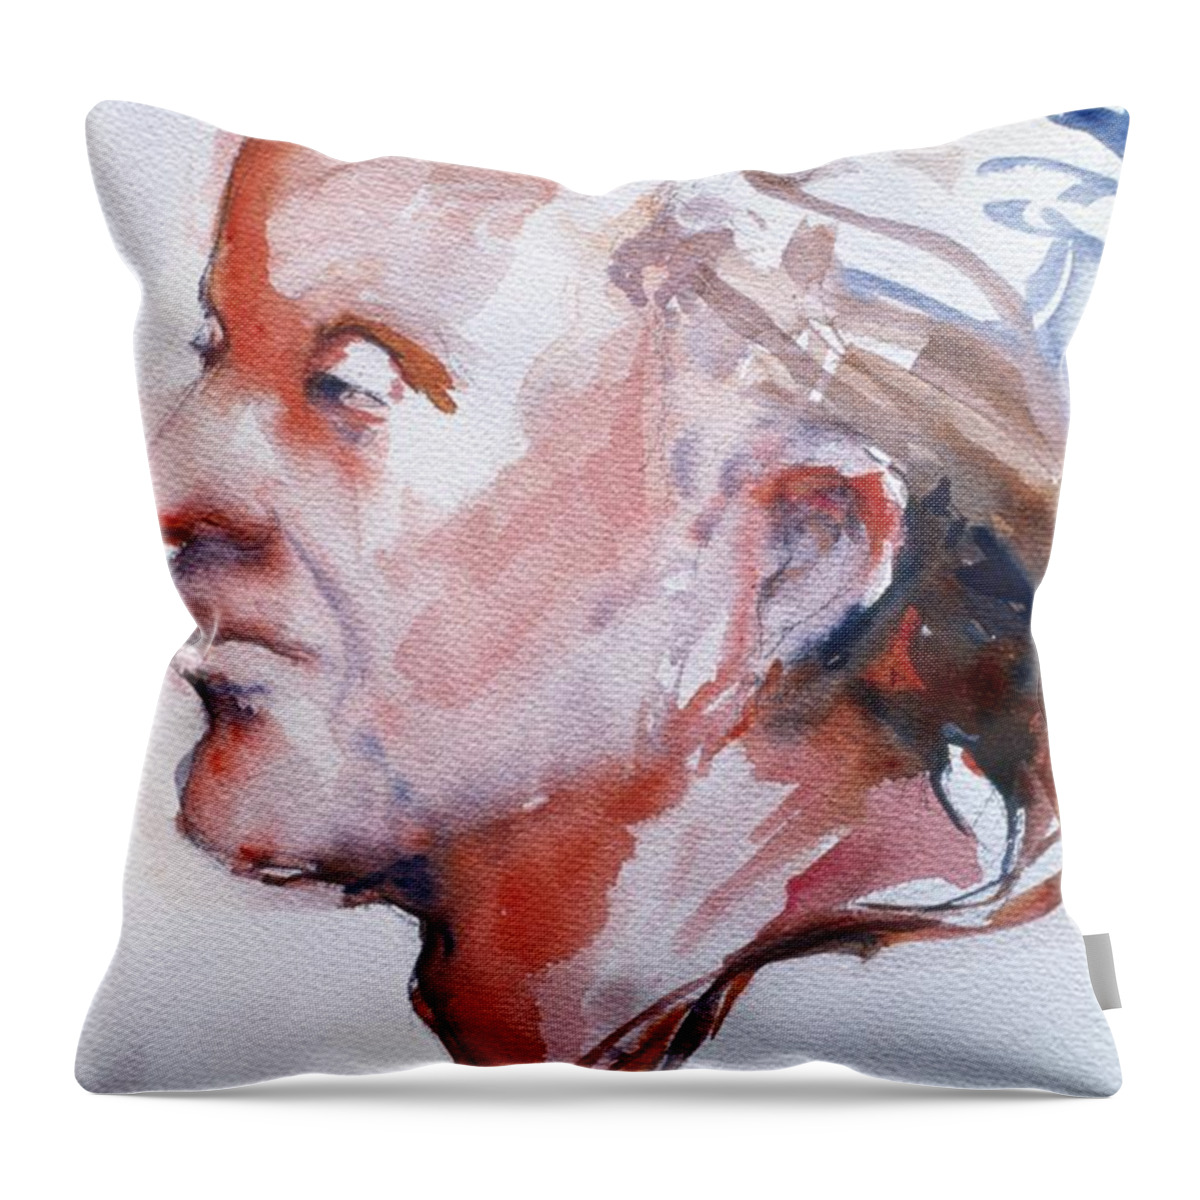 Headshot Throw Pillow featuring the painting Head Study 5 by Barbara Pease